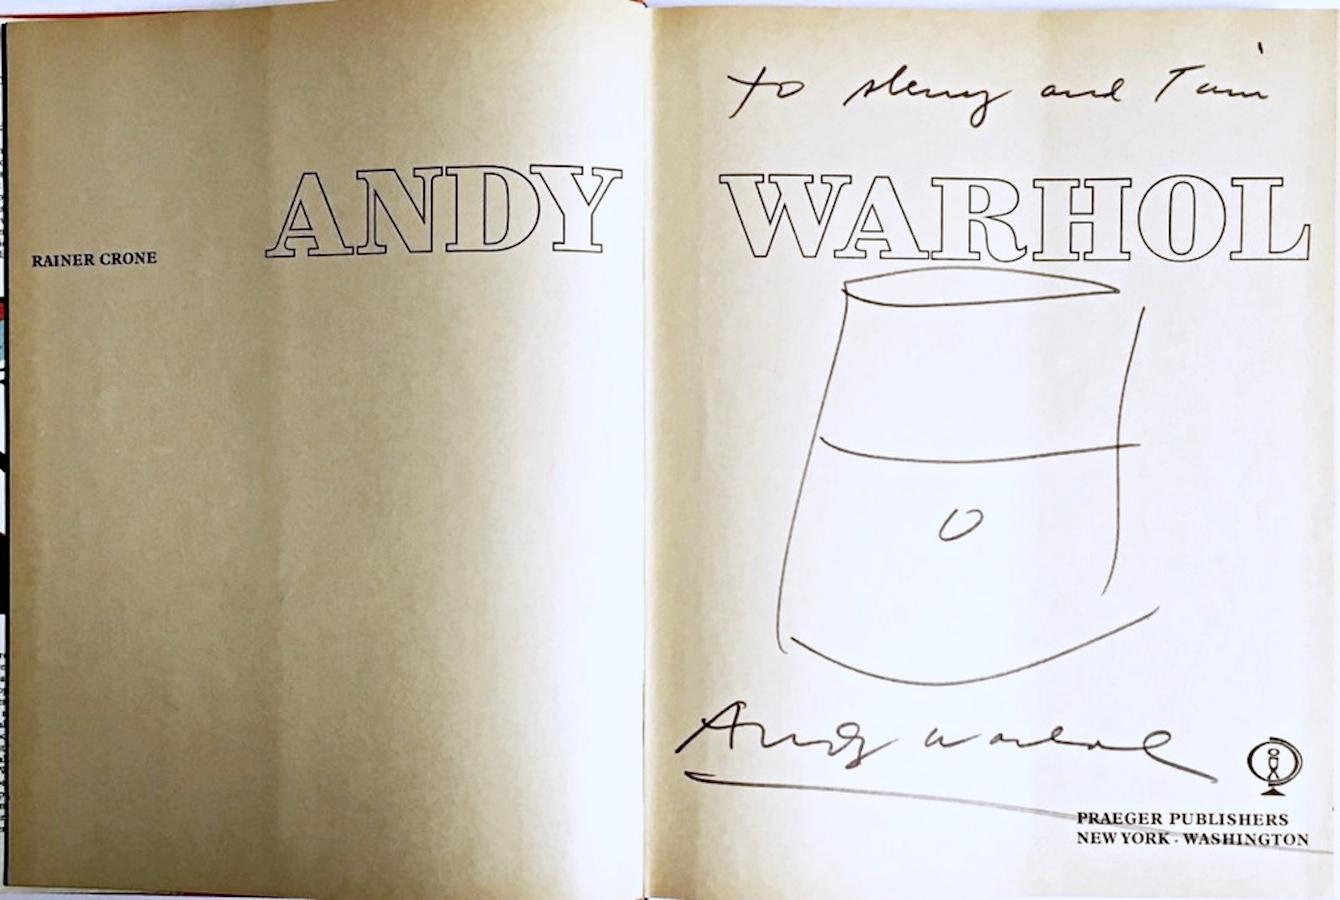 Andy Warhol
Original Soup Can Drawing, inscribed by Andy Warhol to Rock & Roll hall of famer, ca. 1985
Felt Pen
Unique Drawing hand signed by Andy Warhol and inscribed to Rock & Roll Hall of Famer Tim D. Kehr and his wife. Bound in 1st Warhol